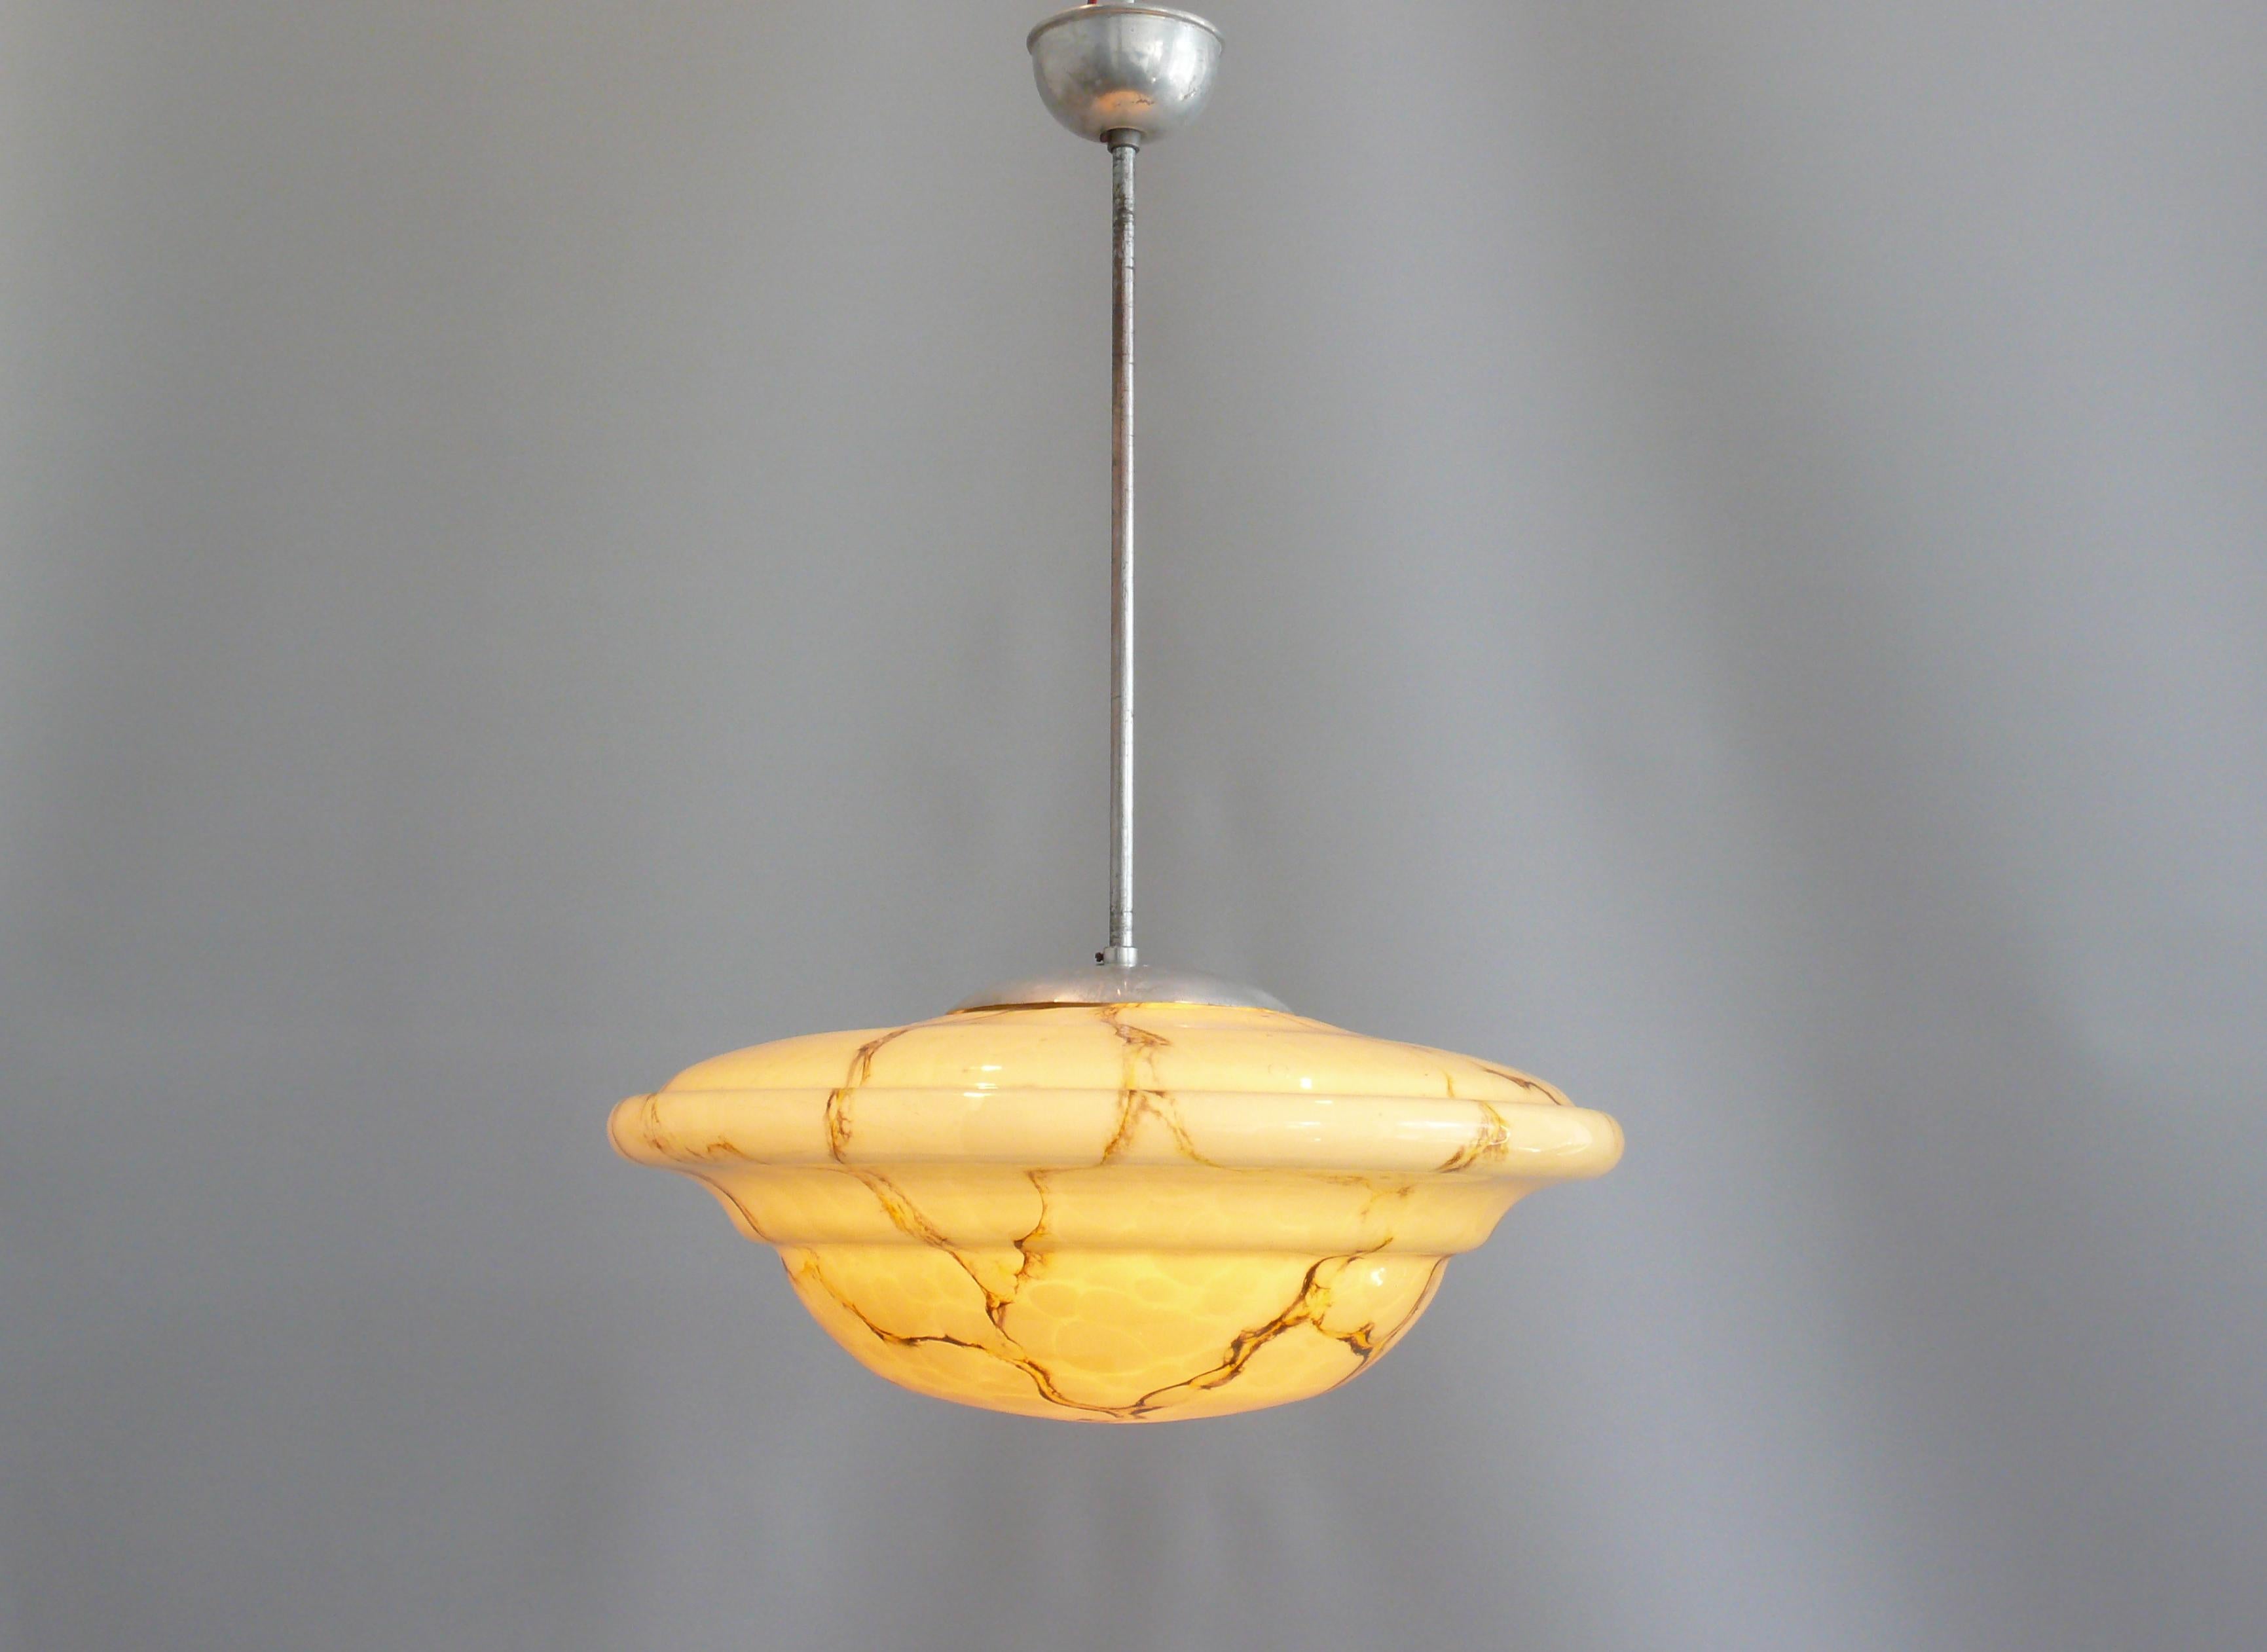 Large Art Deco pendant lamp with a profiled glass shade and silver suspension. The large, marbled glass shade is in very good condition and has a beautiful curve. The socket is made of brass, the ceiling suspension is made of metal. The lamp dates